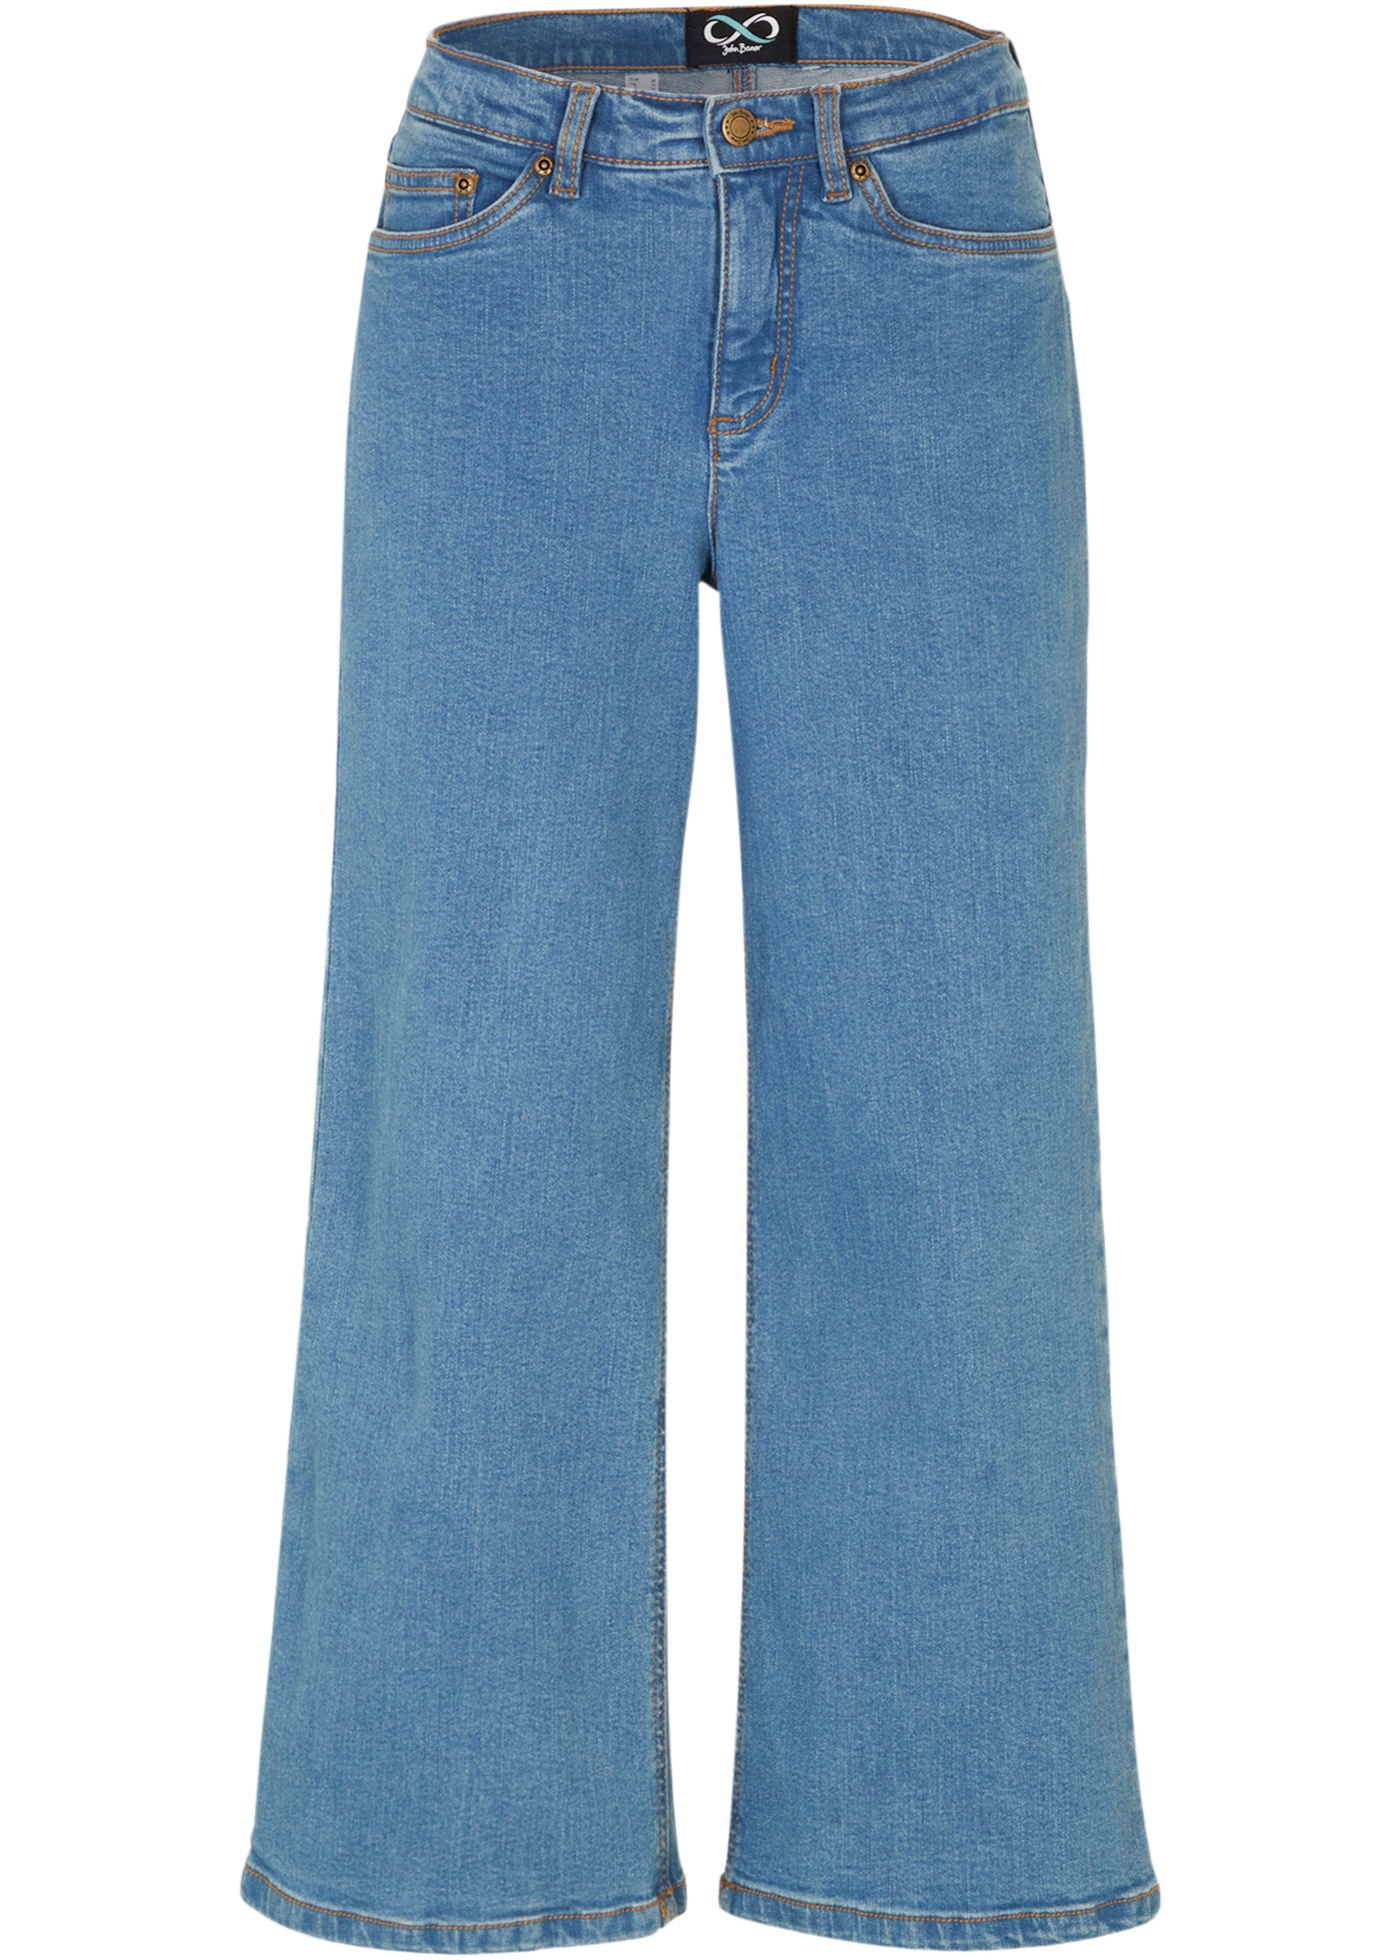 Essential 7/8 jeans, wide